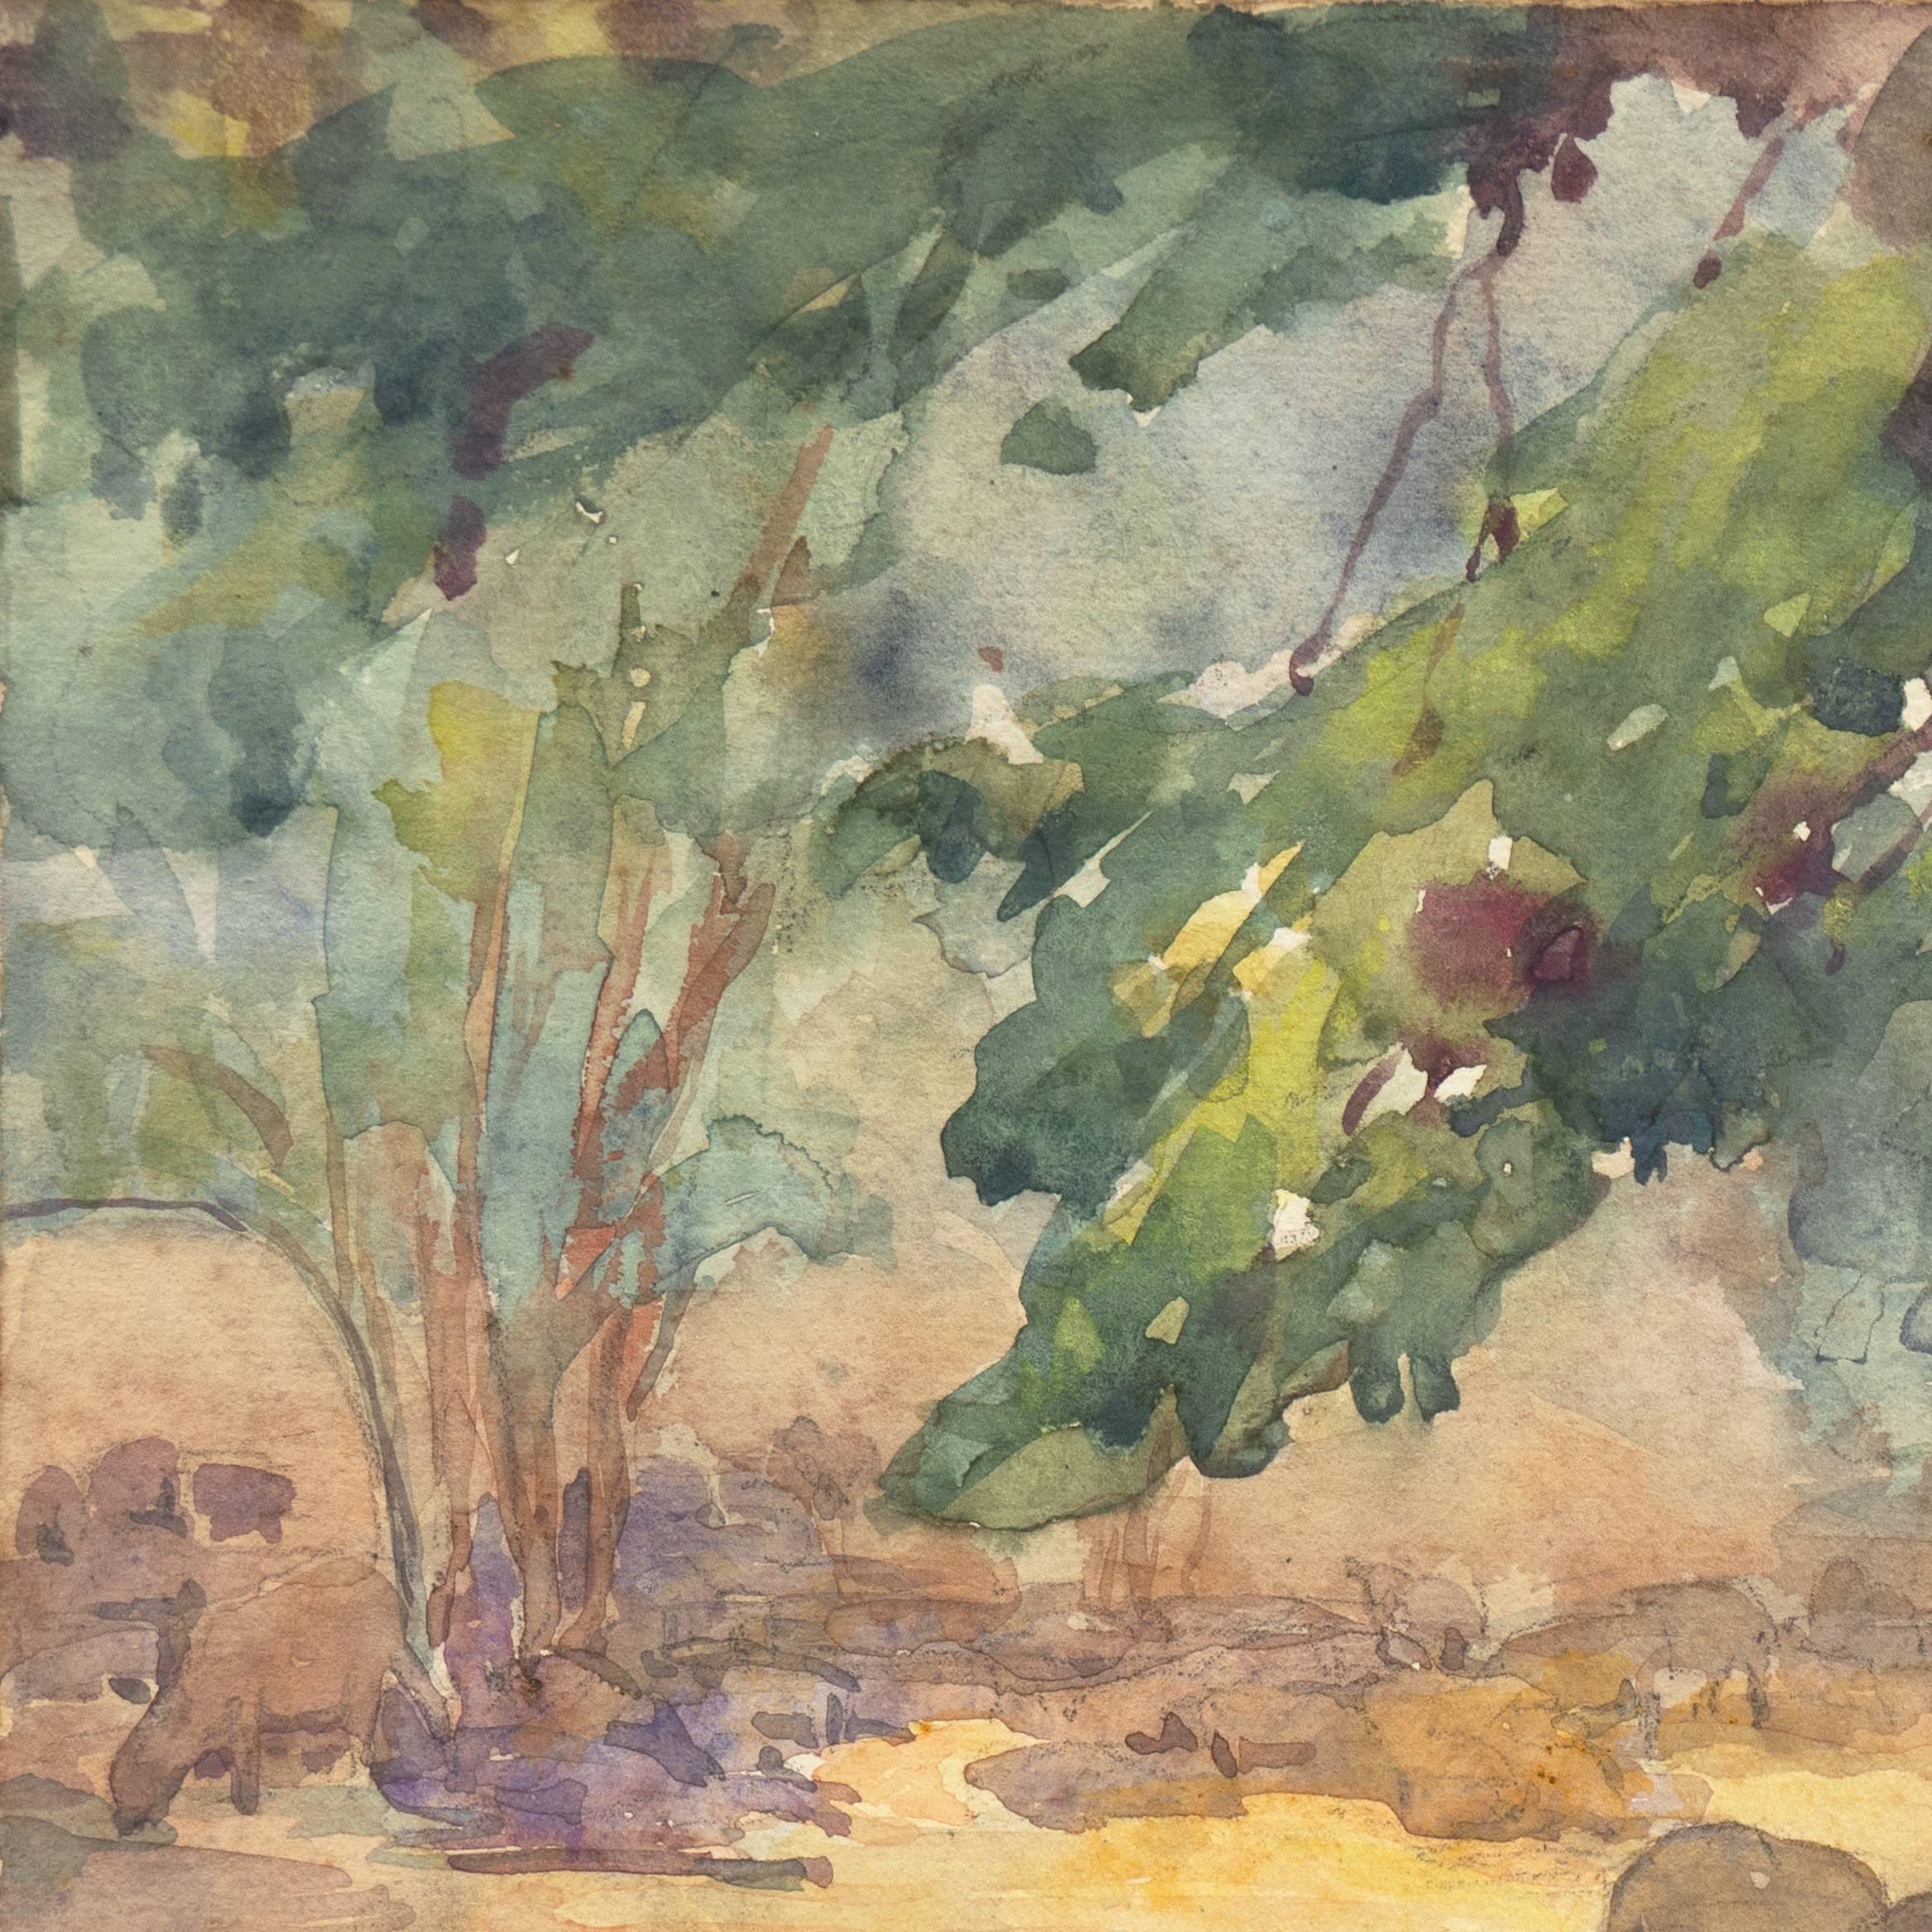 'Resting in the Shade', AIC 1